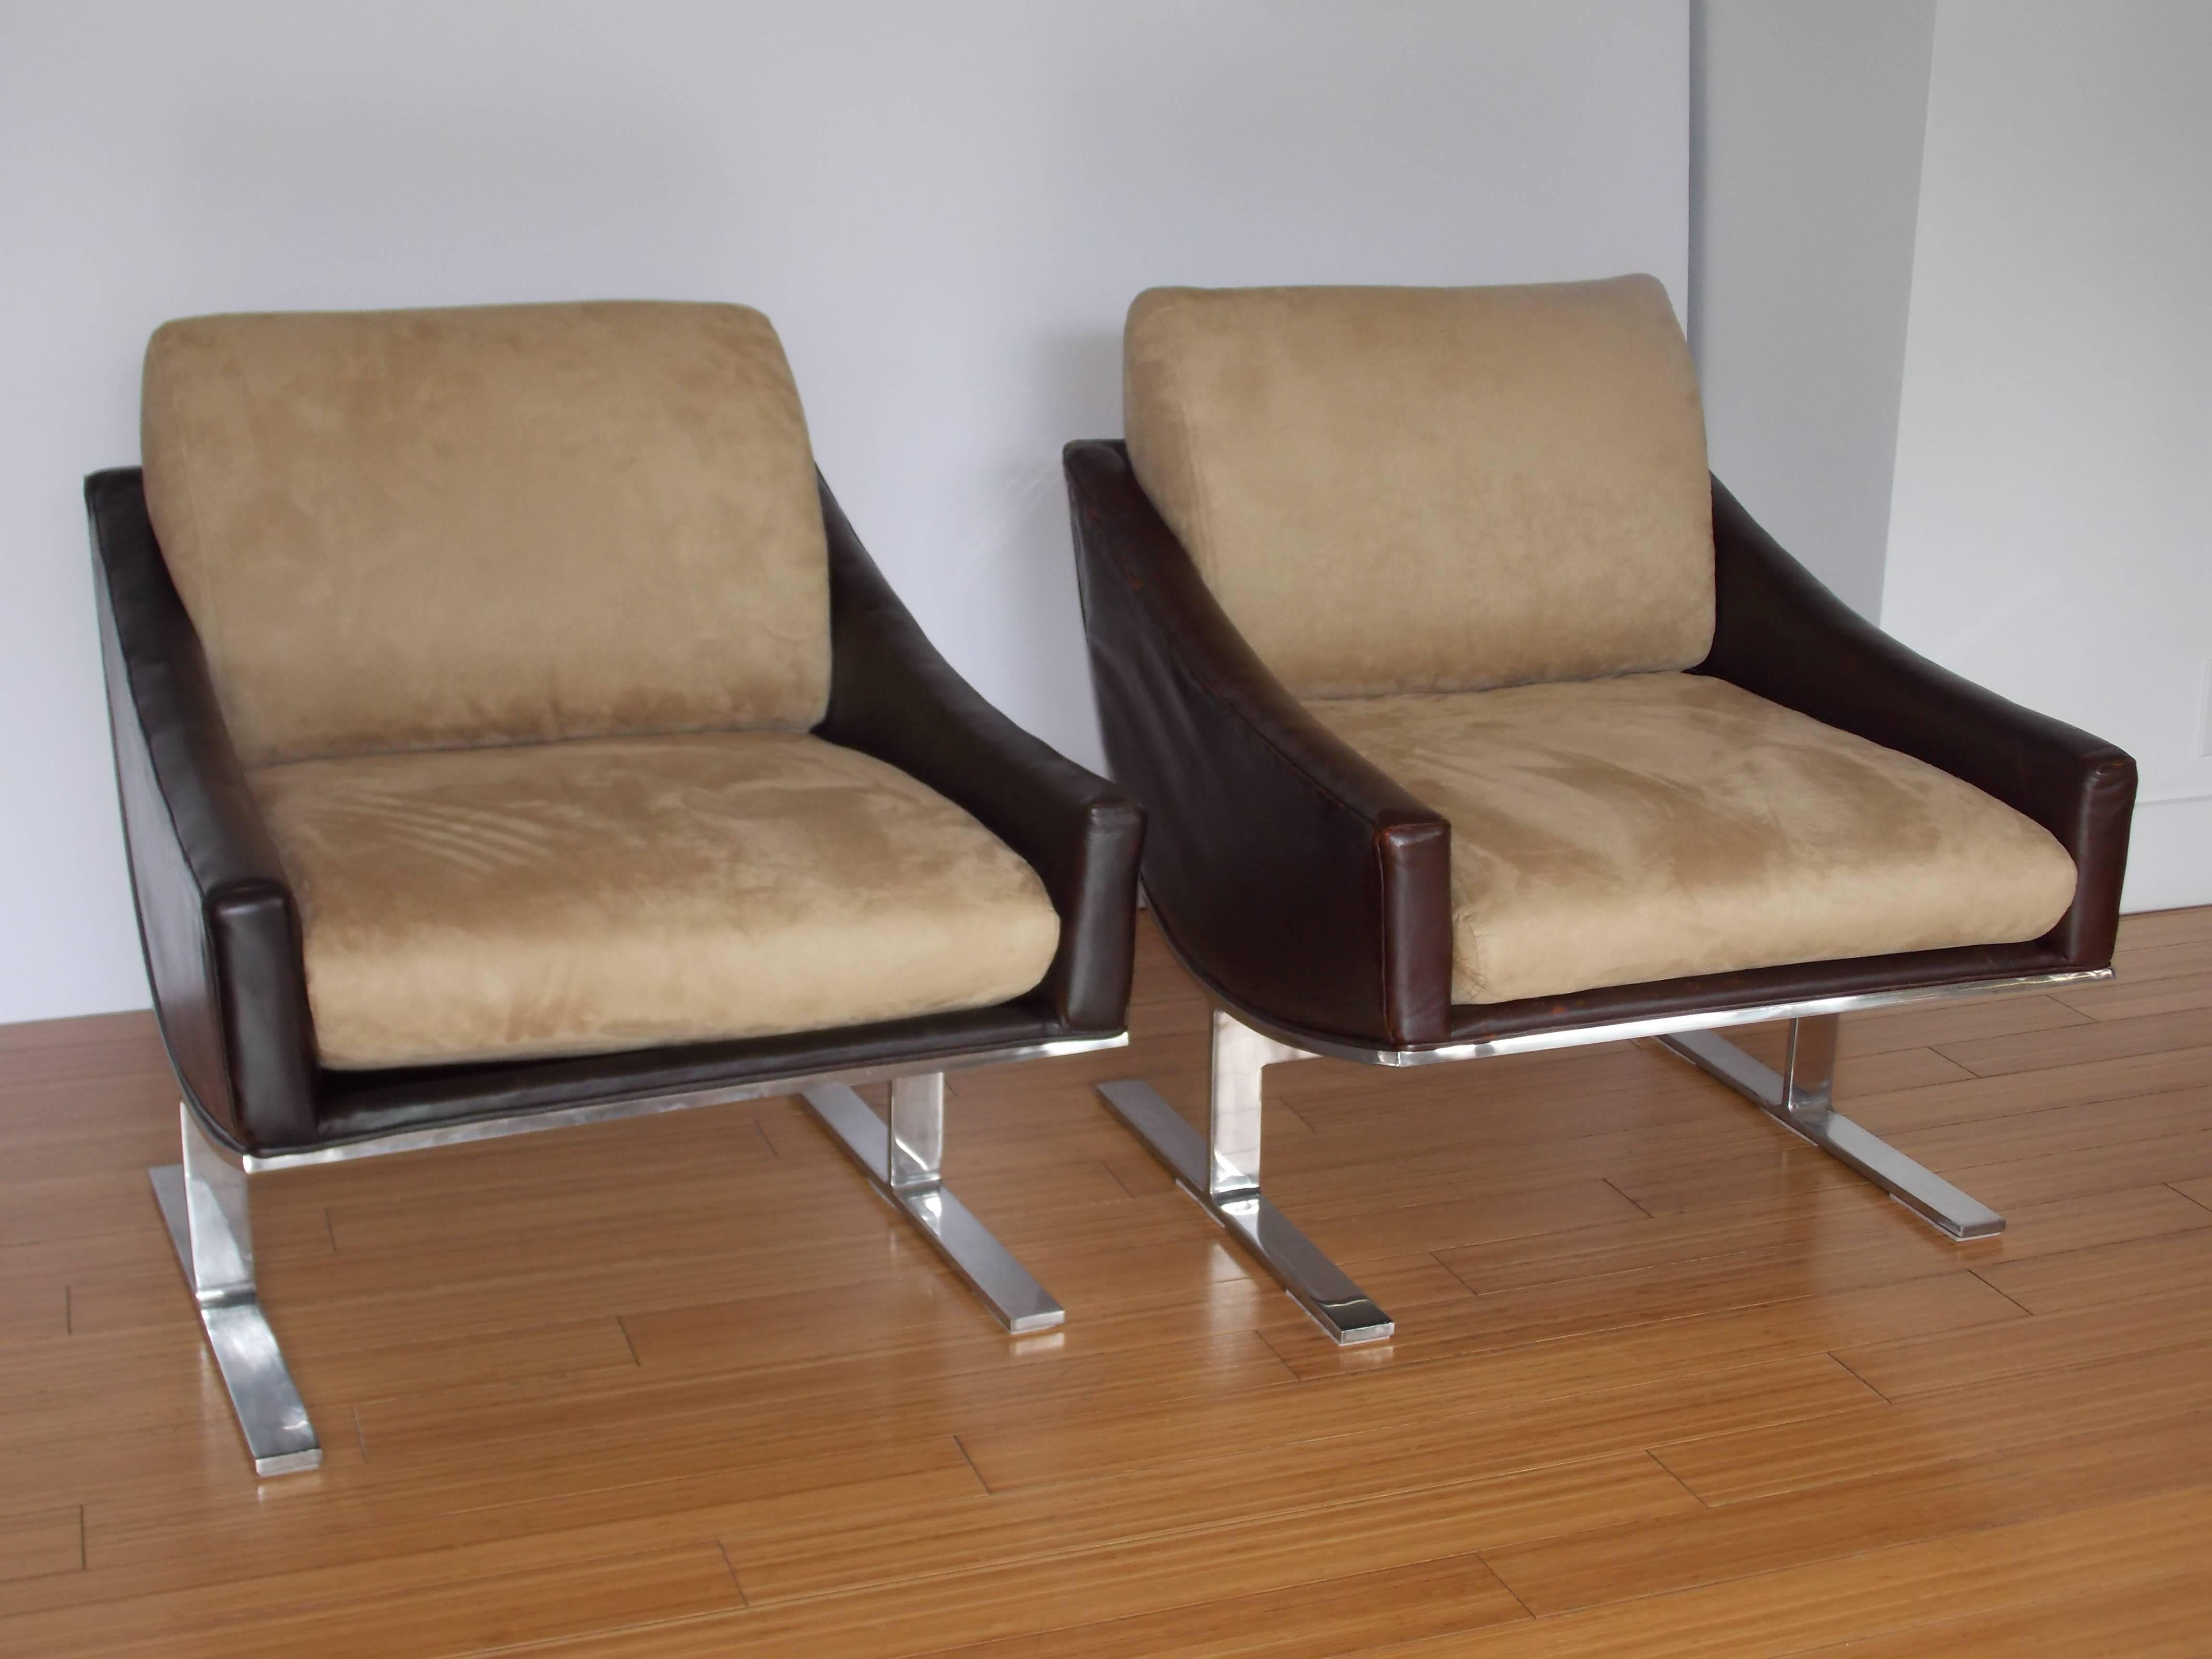 A nice pair of timeless designs. 
The have the original brown leather that shows ware consistent with age, with new upholstered ultra suede cushions in great condition.
The base is made of nickel-plated steel with minor ware.
These are sturdy and